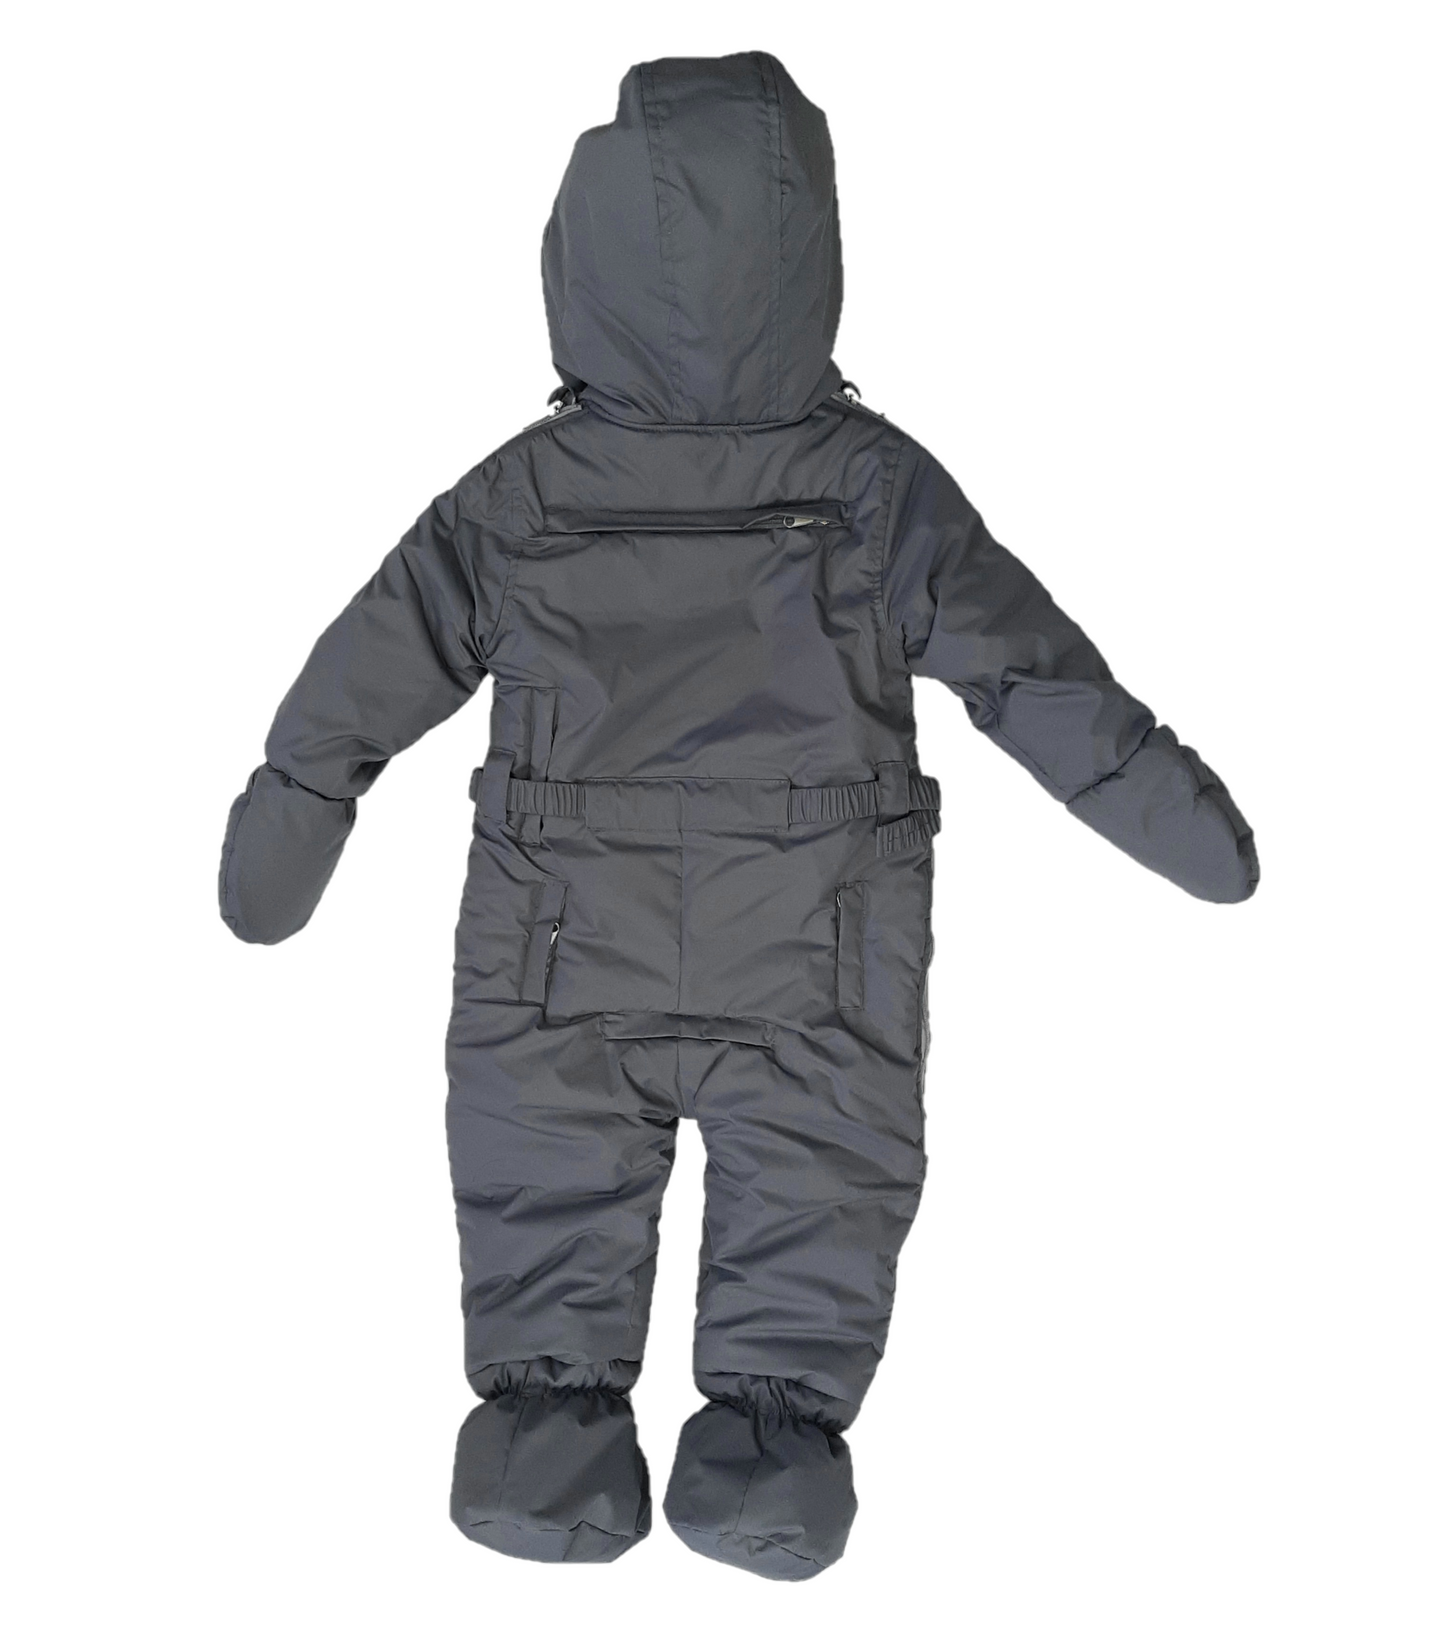 Adaptive snow suit - Handy Adapted Products